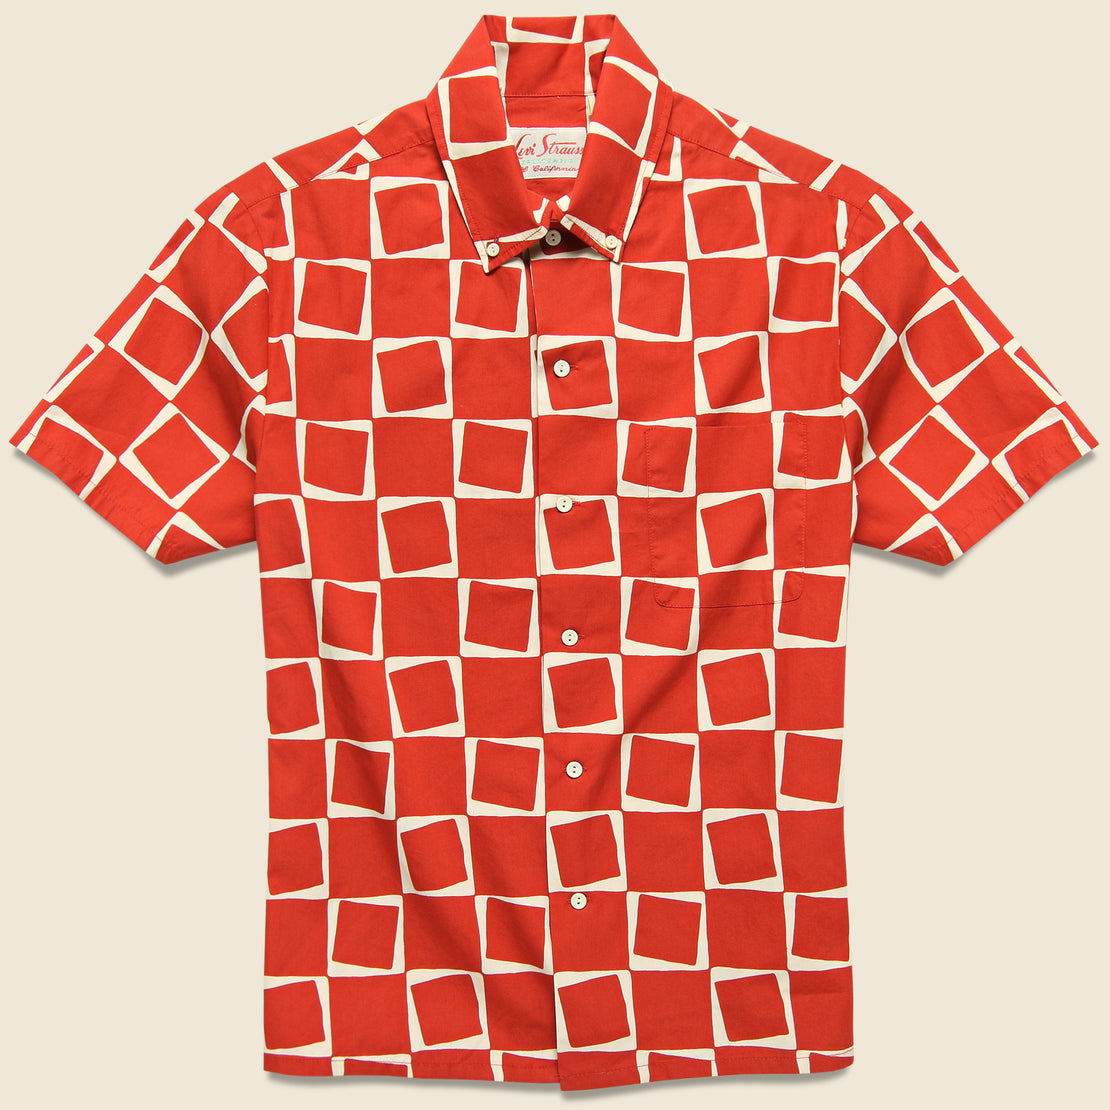 Levis Vintage Clothing 1950s Atomic Square Print Shirt - Red